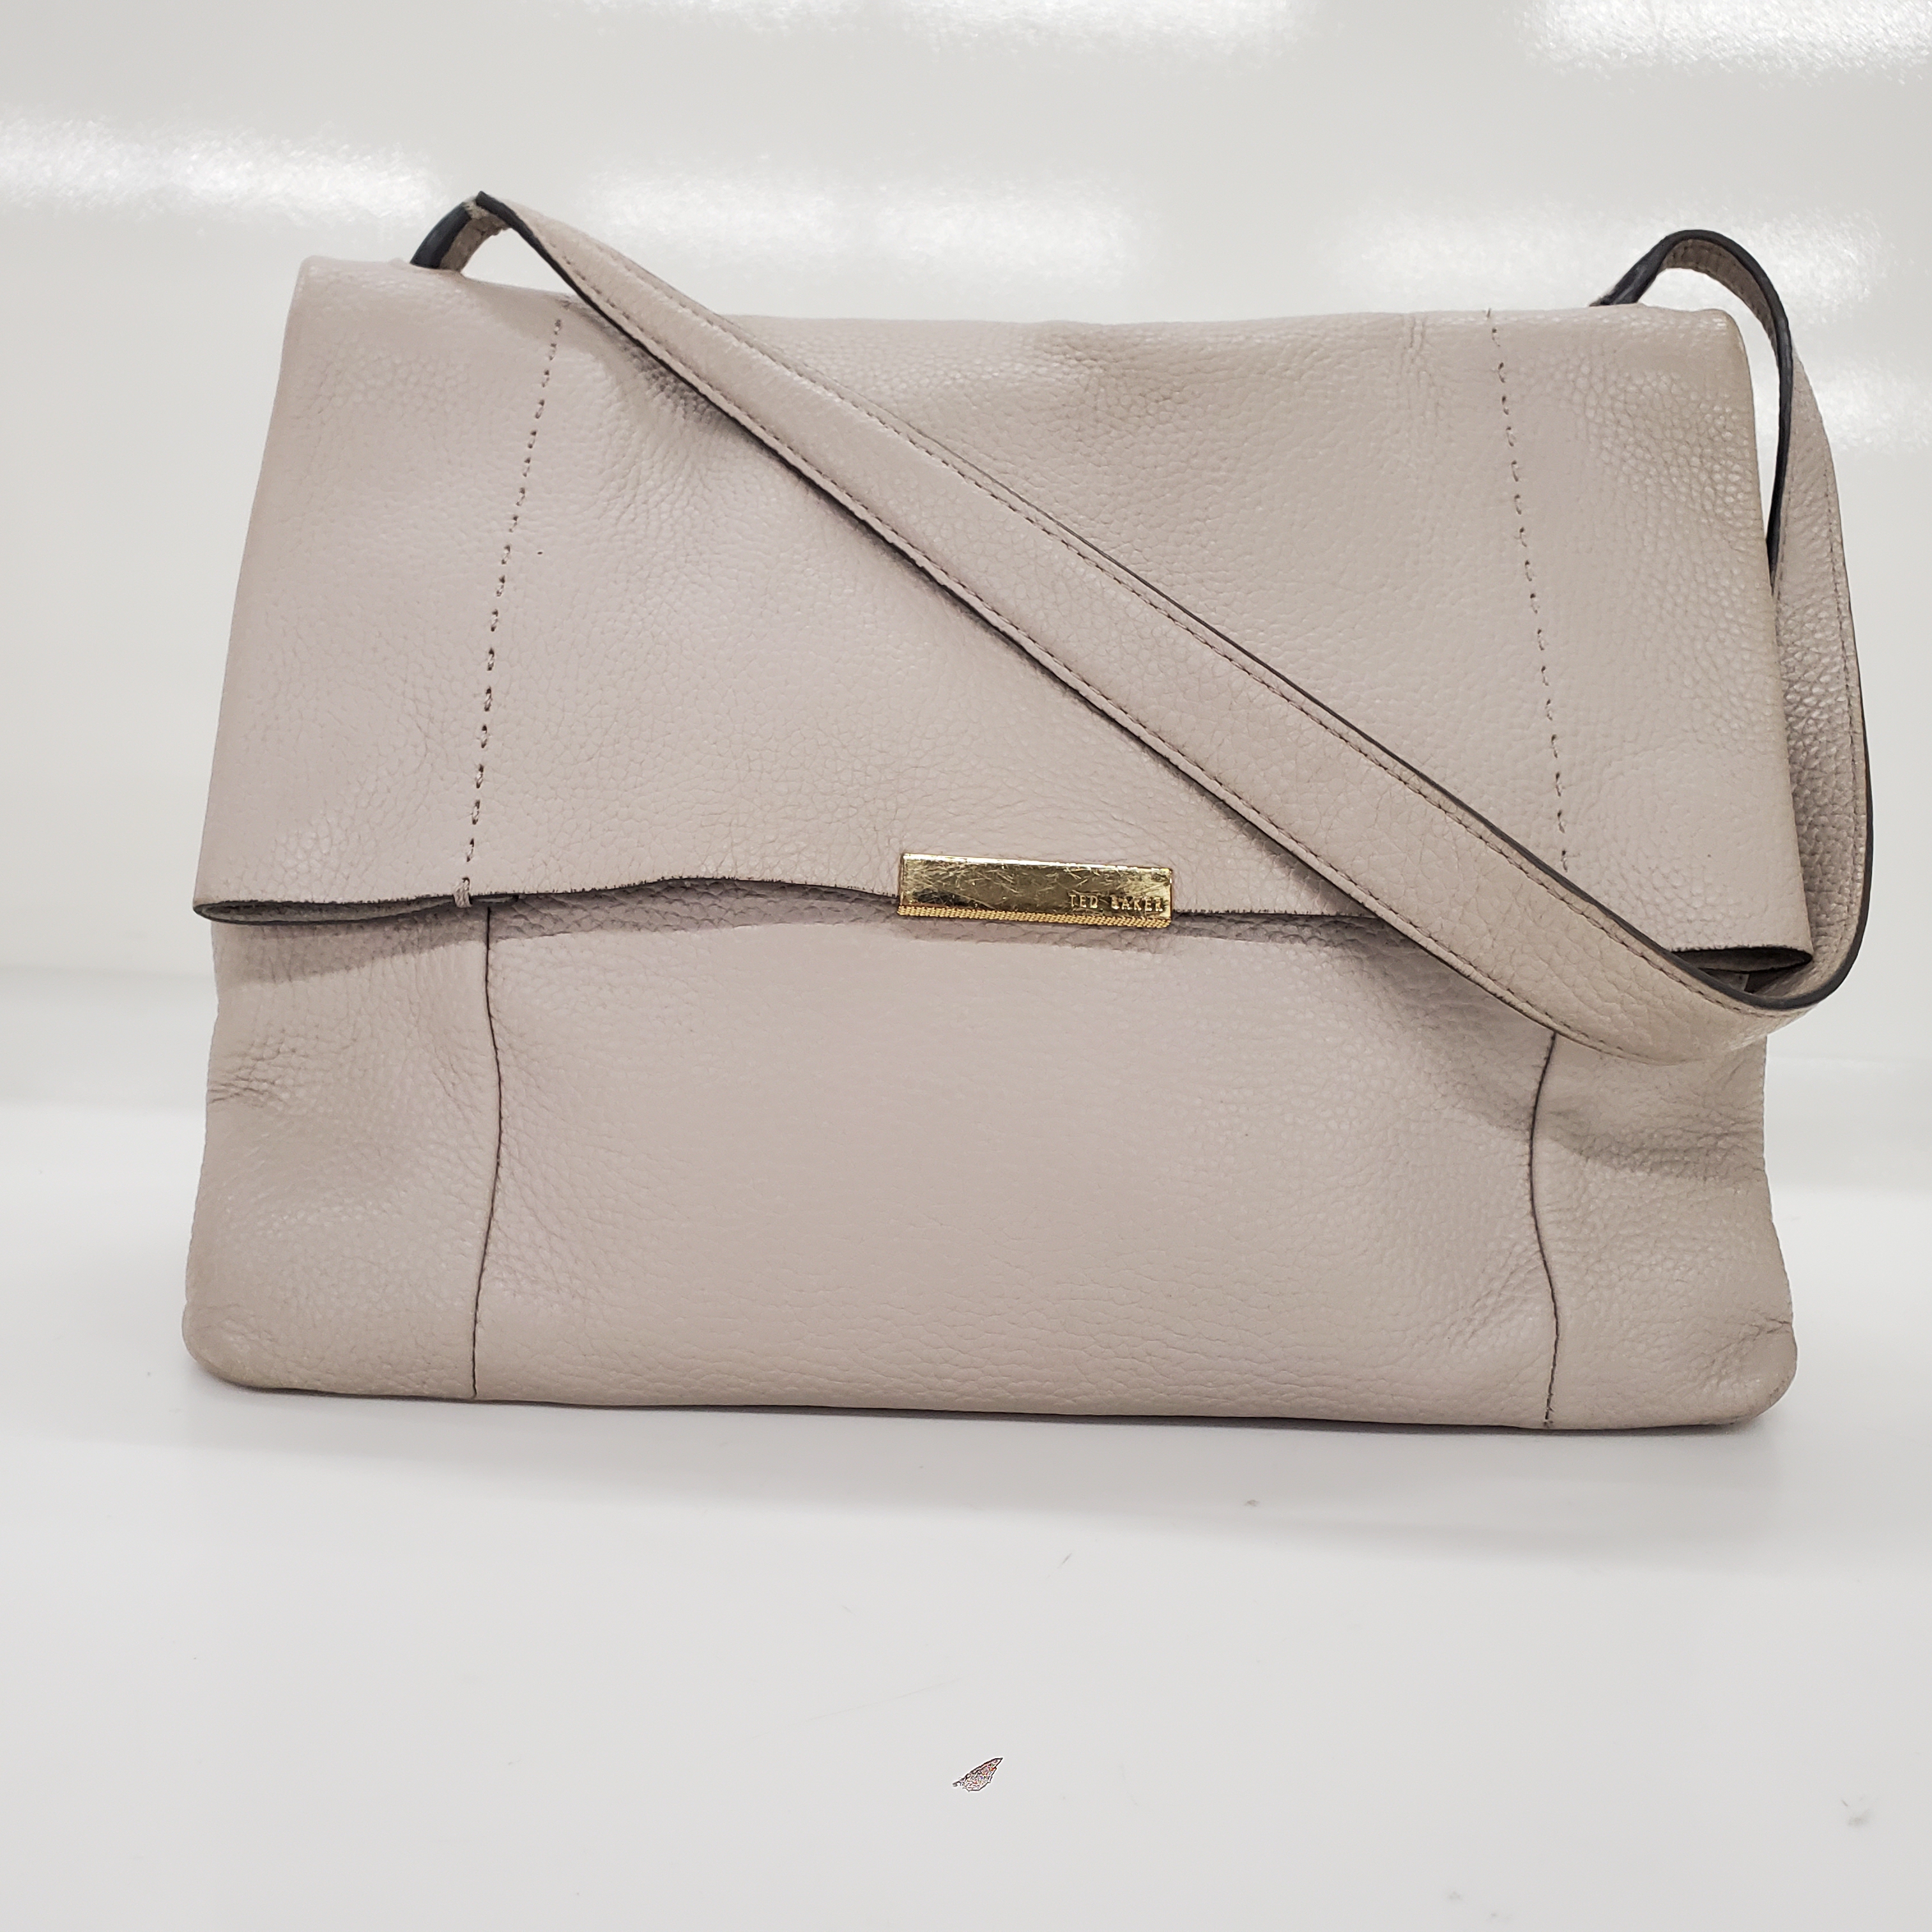 Ted Baker Authenticated Leather Handbag